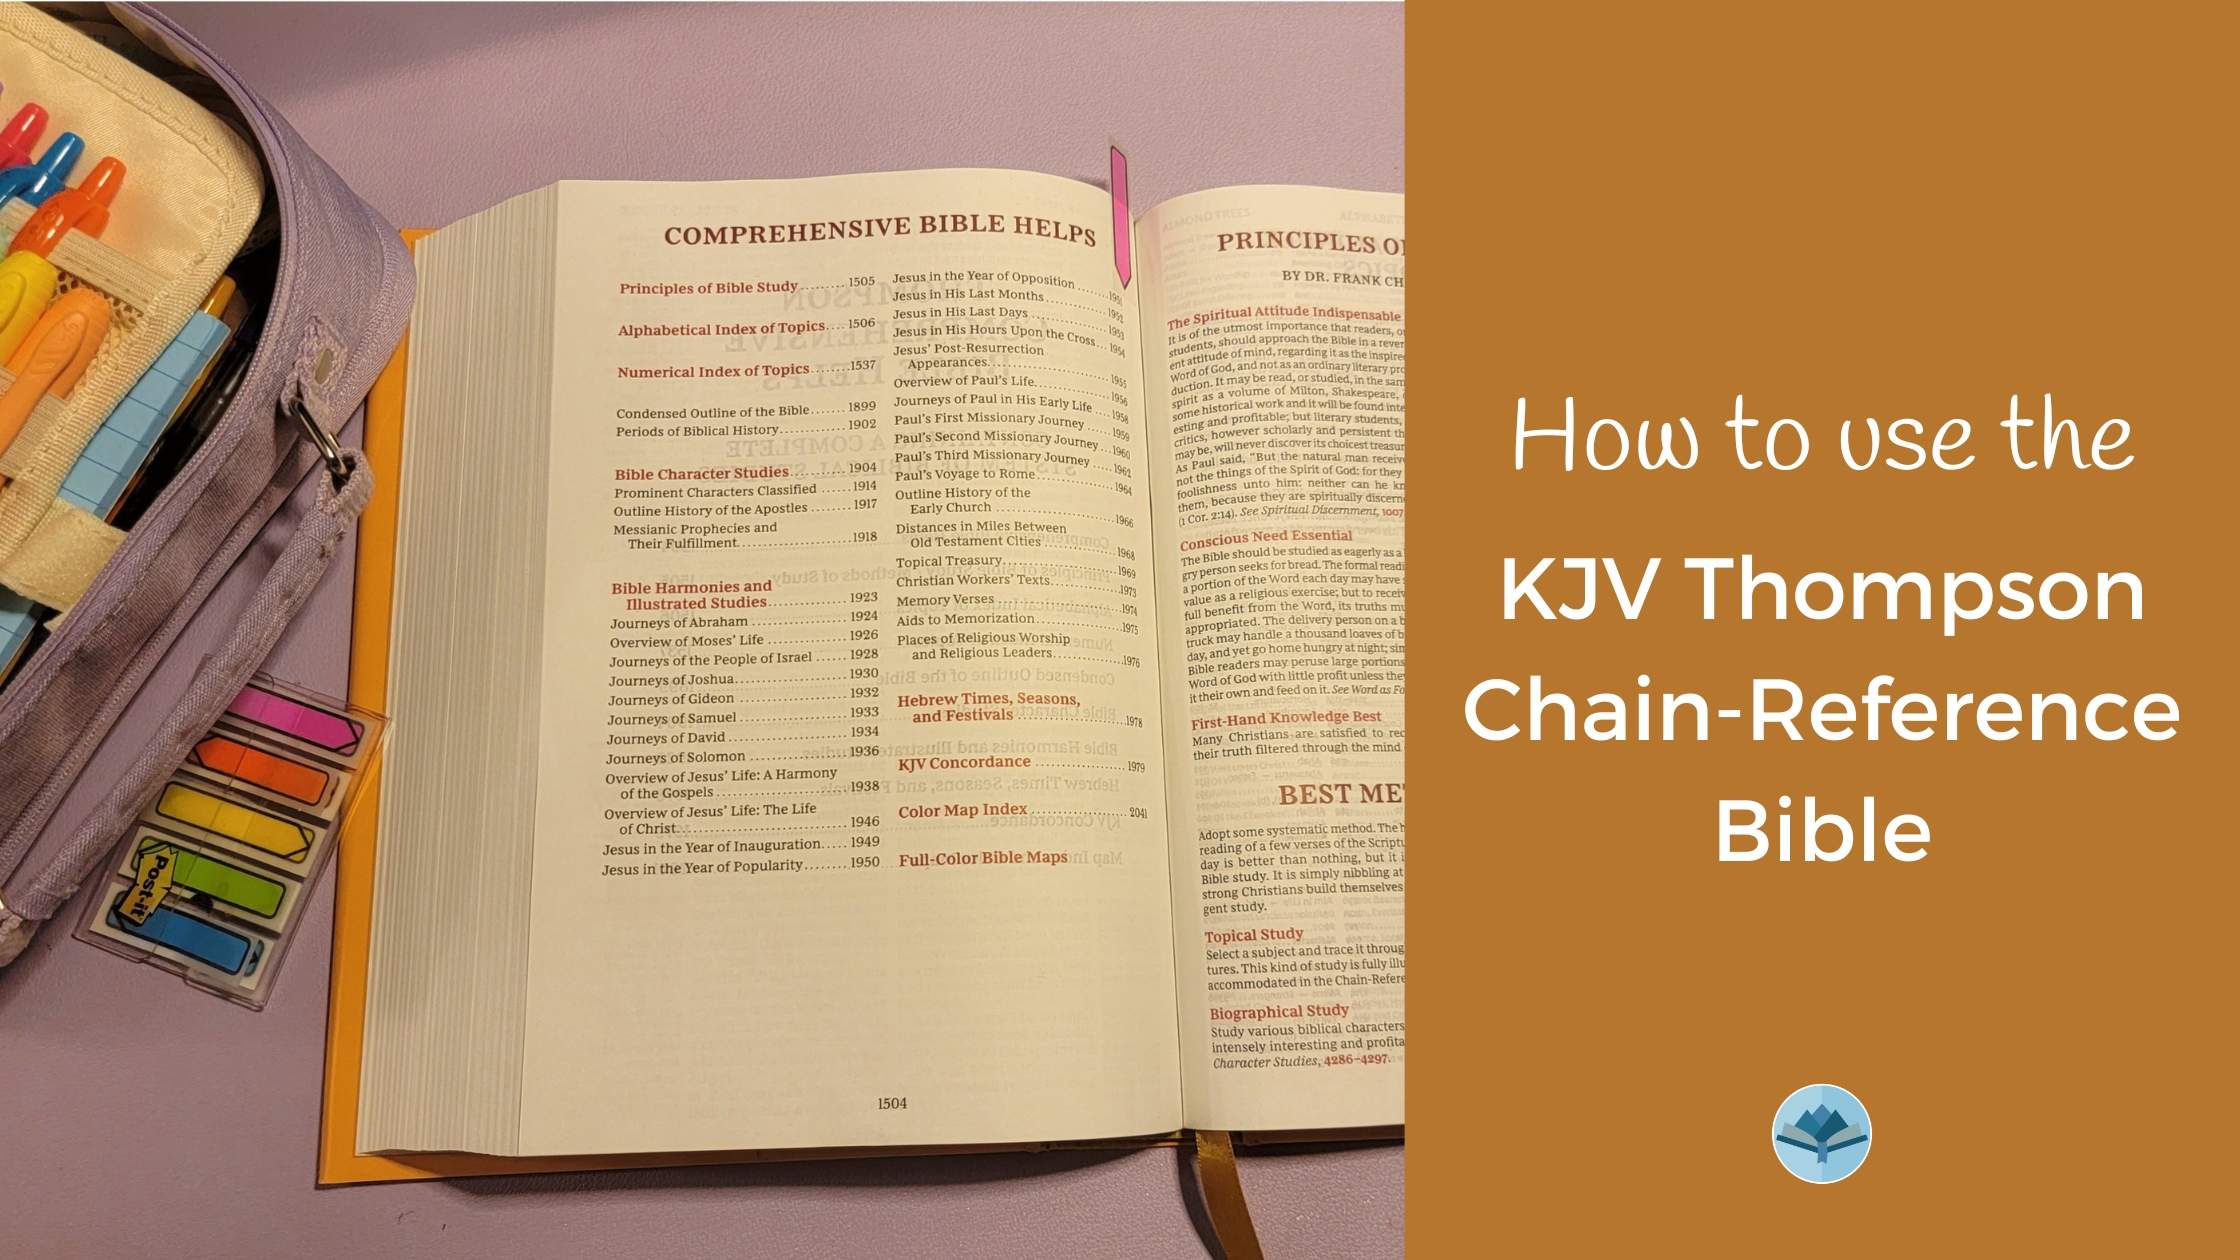 How to use the KJV Thompson Chain-Reference Bible